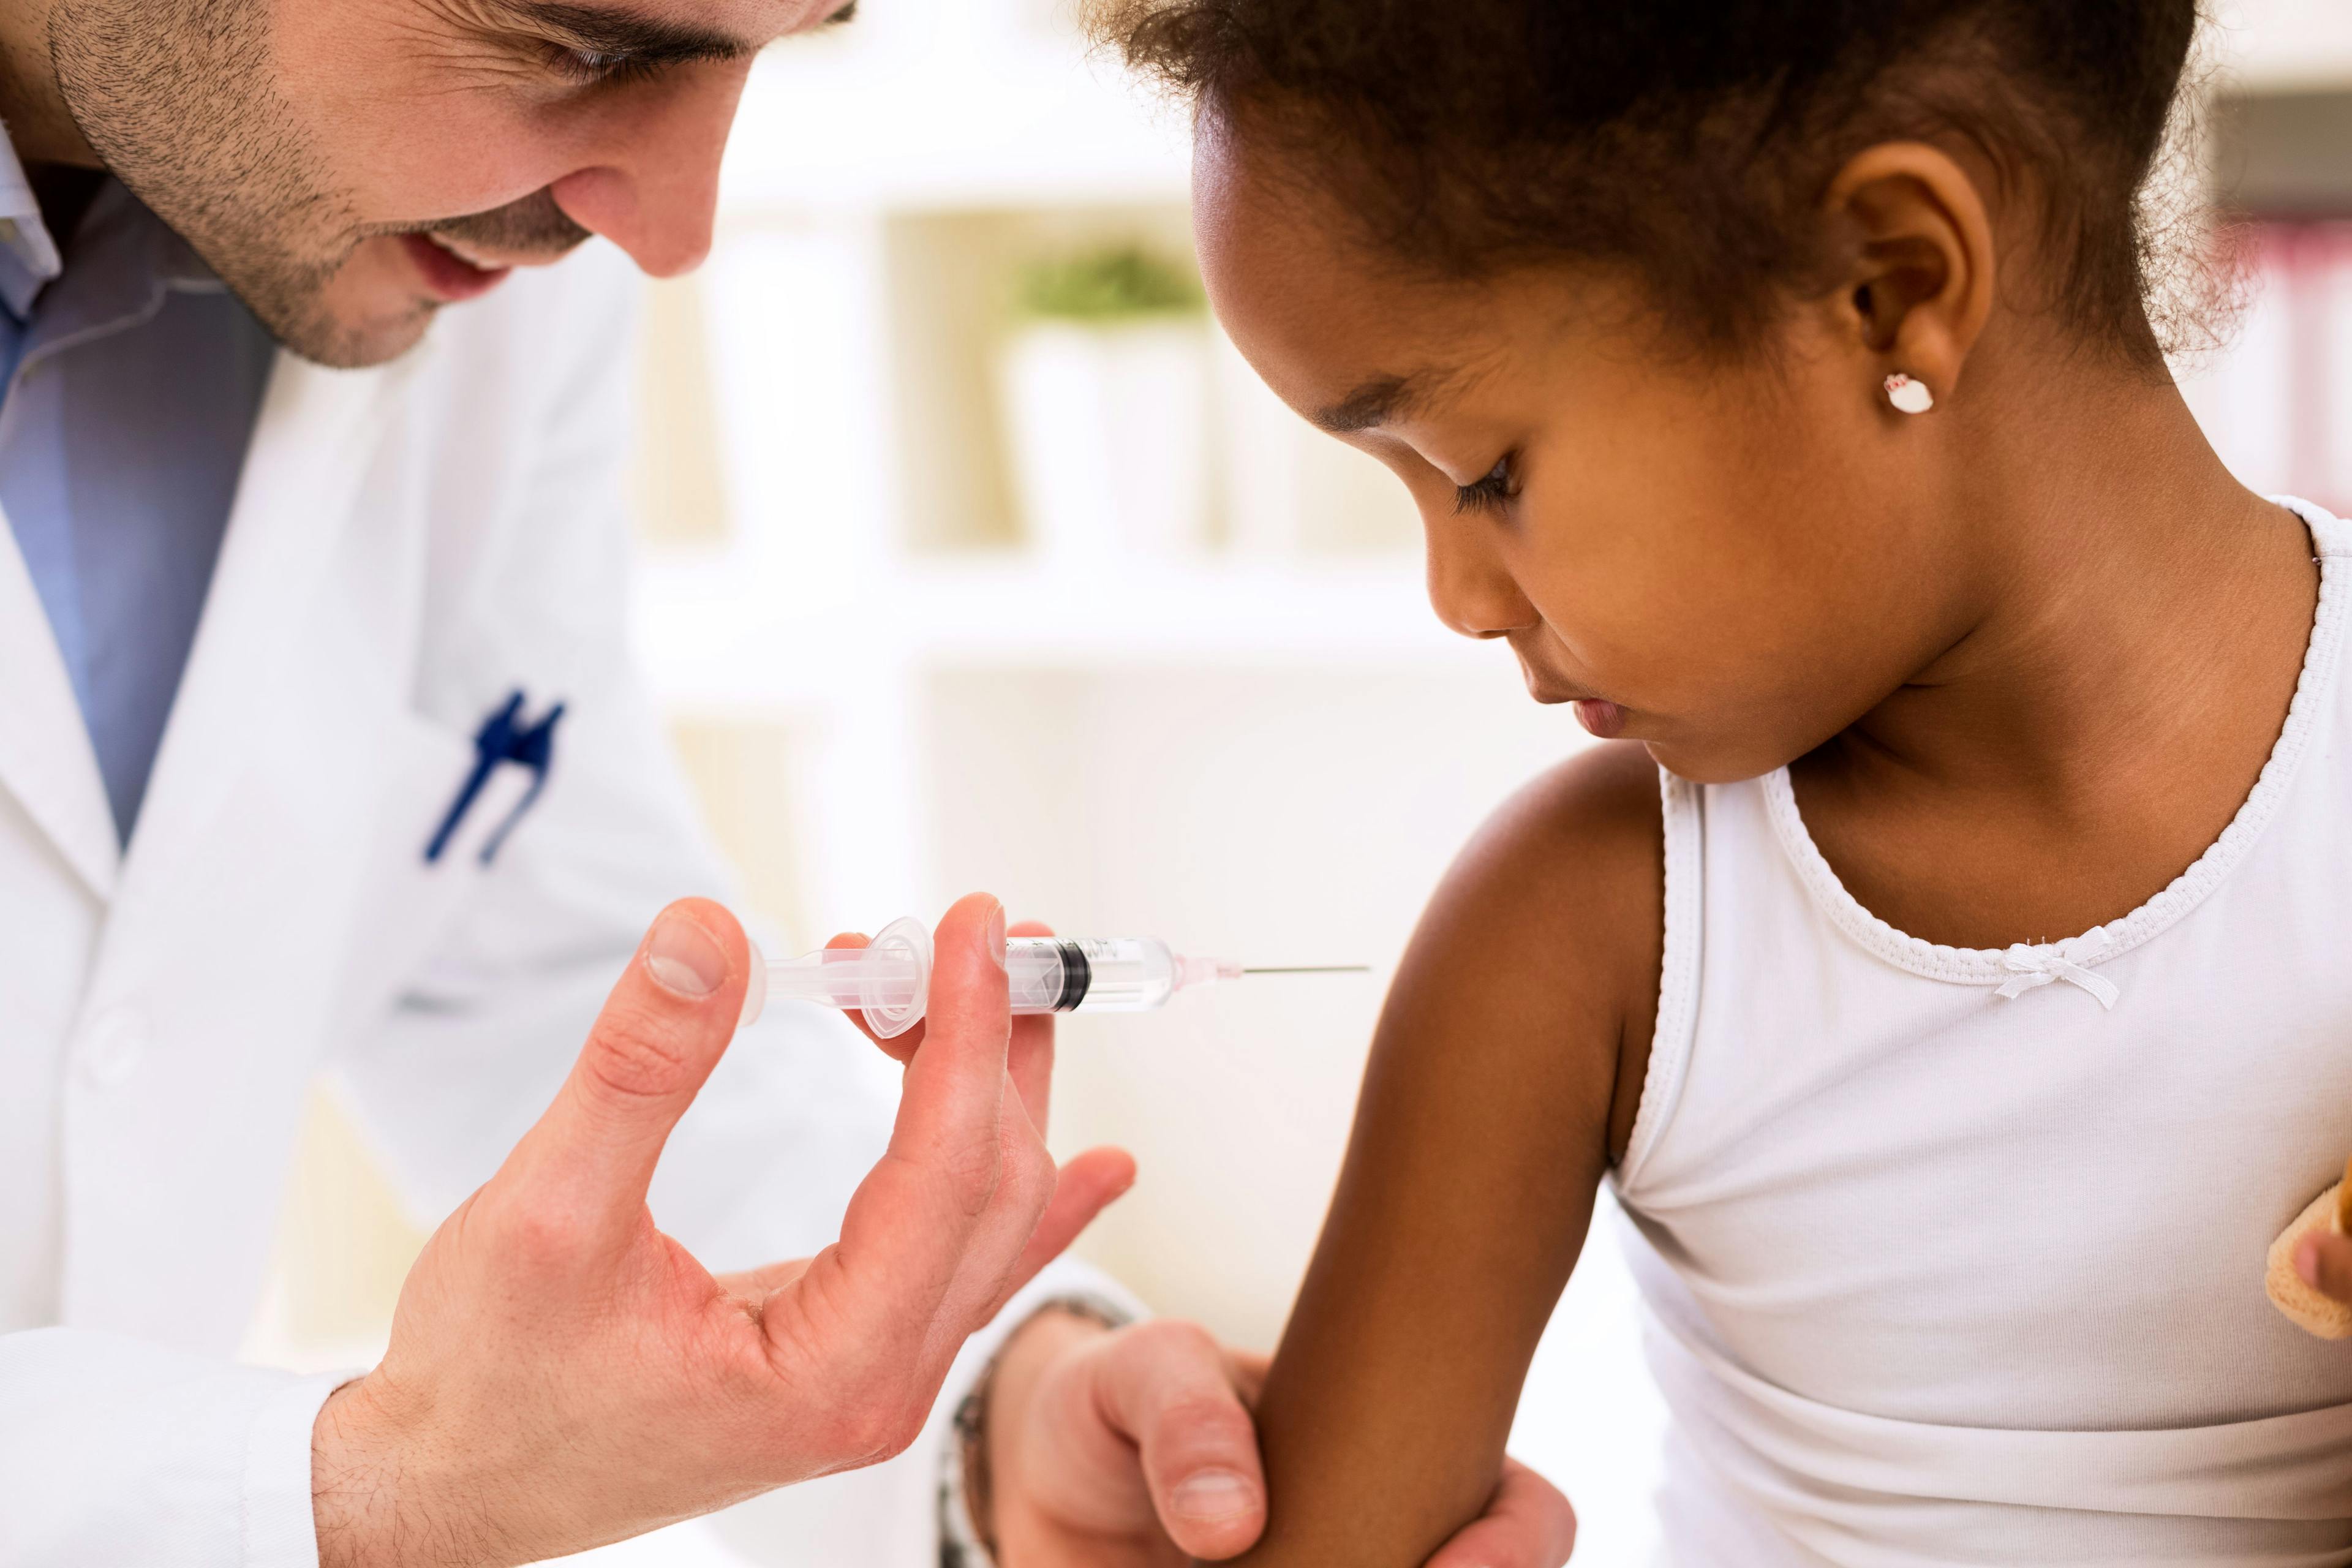 MRNA vaccines efficacious against Omicron infections in children younger than 12 | Image Credit: © didesign - © didesign - stock.adobe.com.